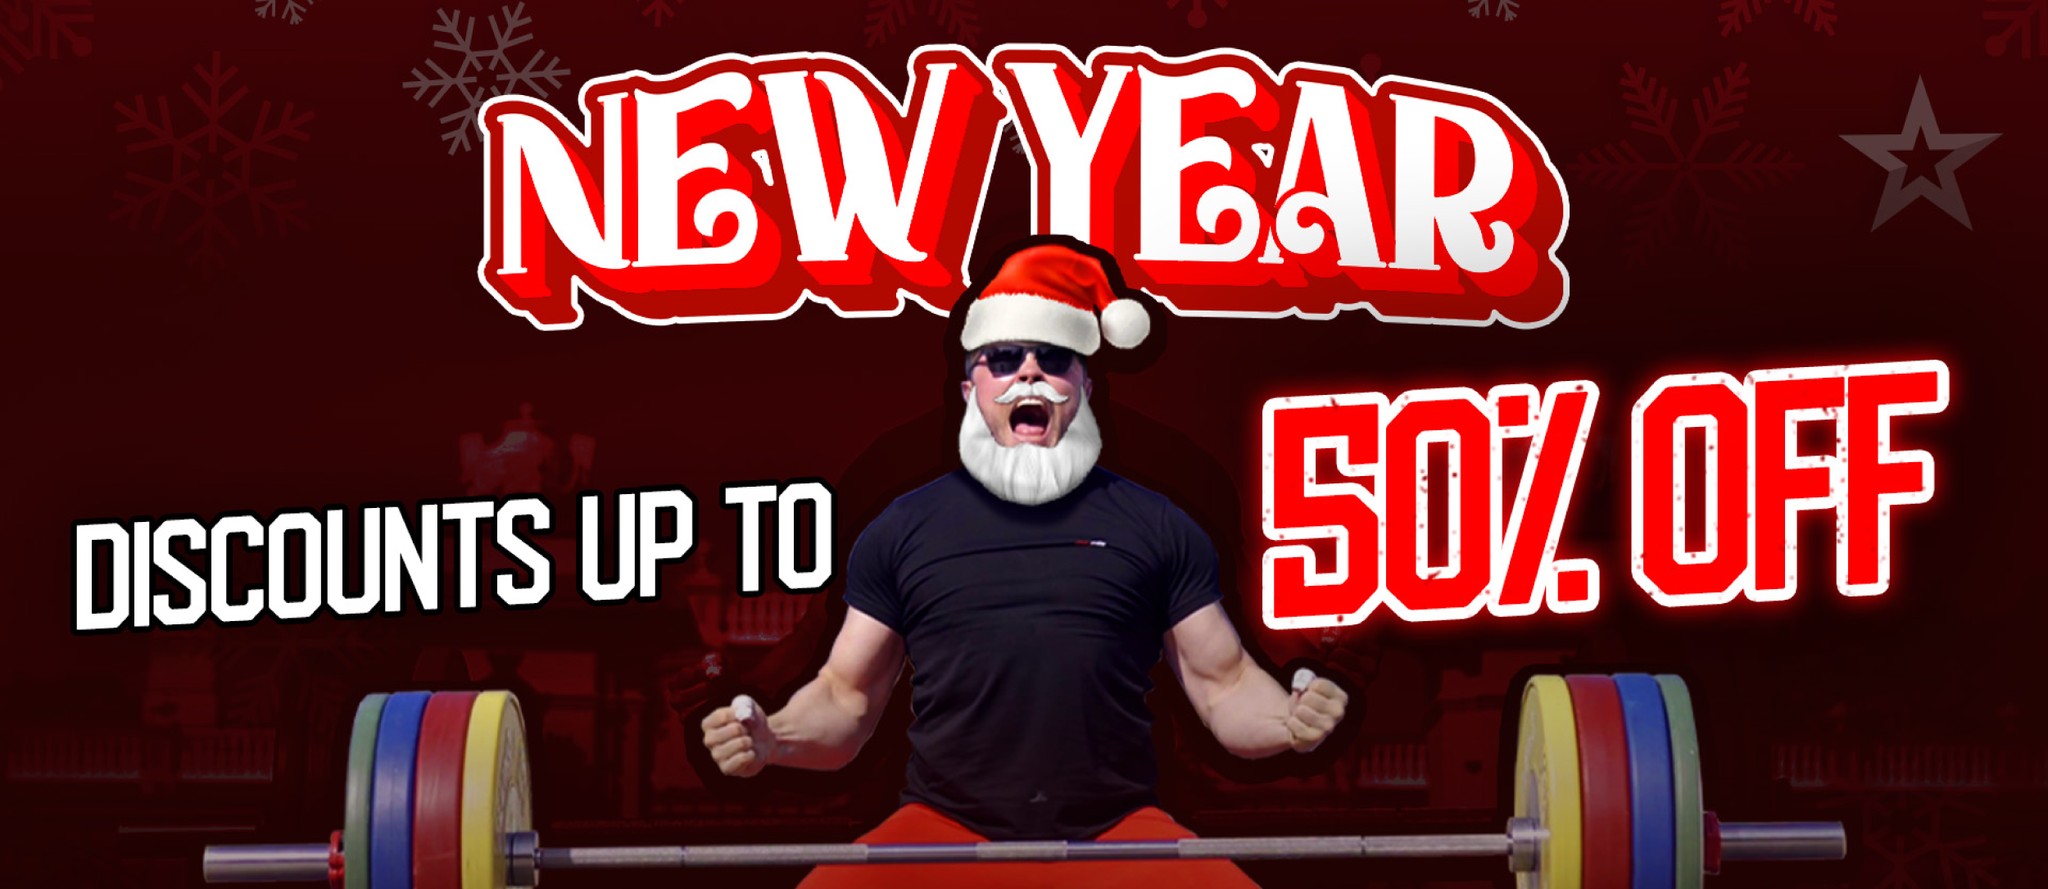 https://cdn.shopify.com/s/files/1/0061/6939/5313/files/NewYearSalecollectionsbanner_2048x2048.png?v=1703244847